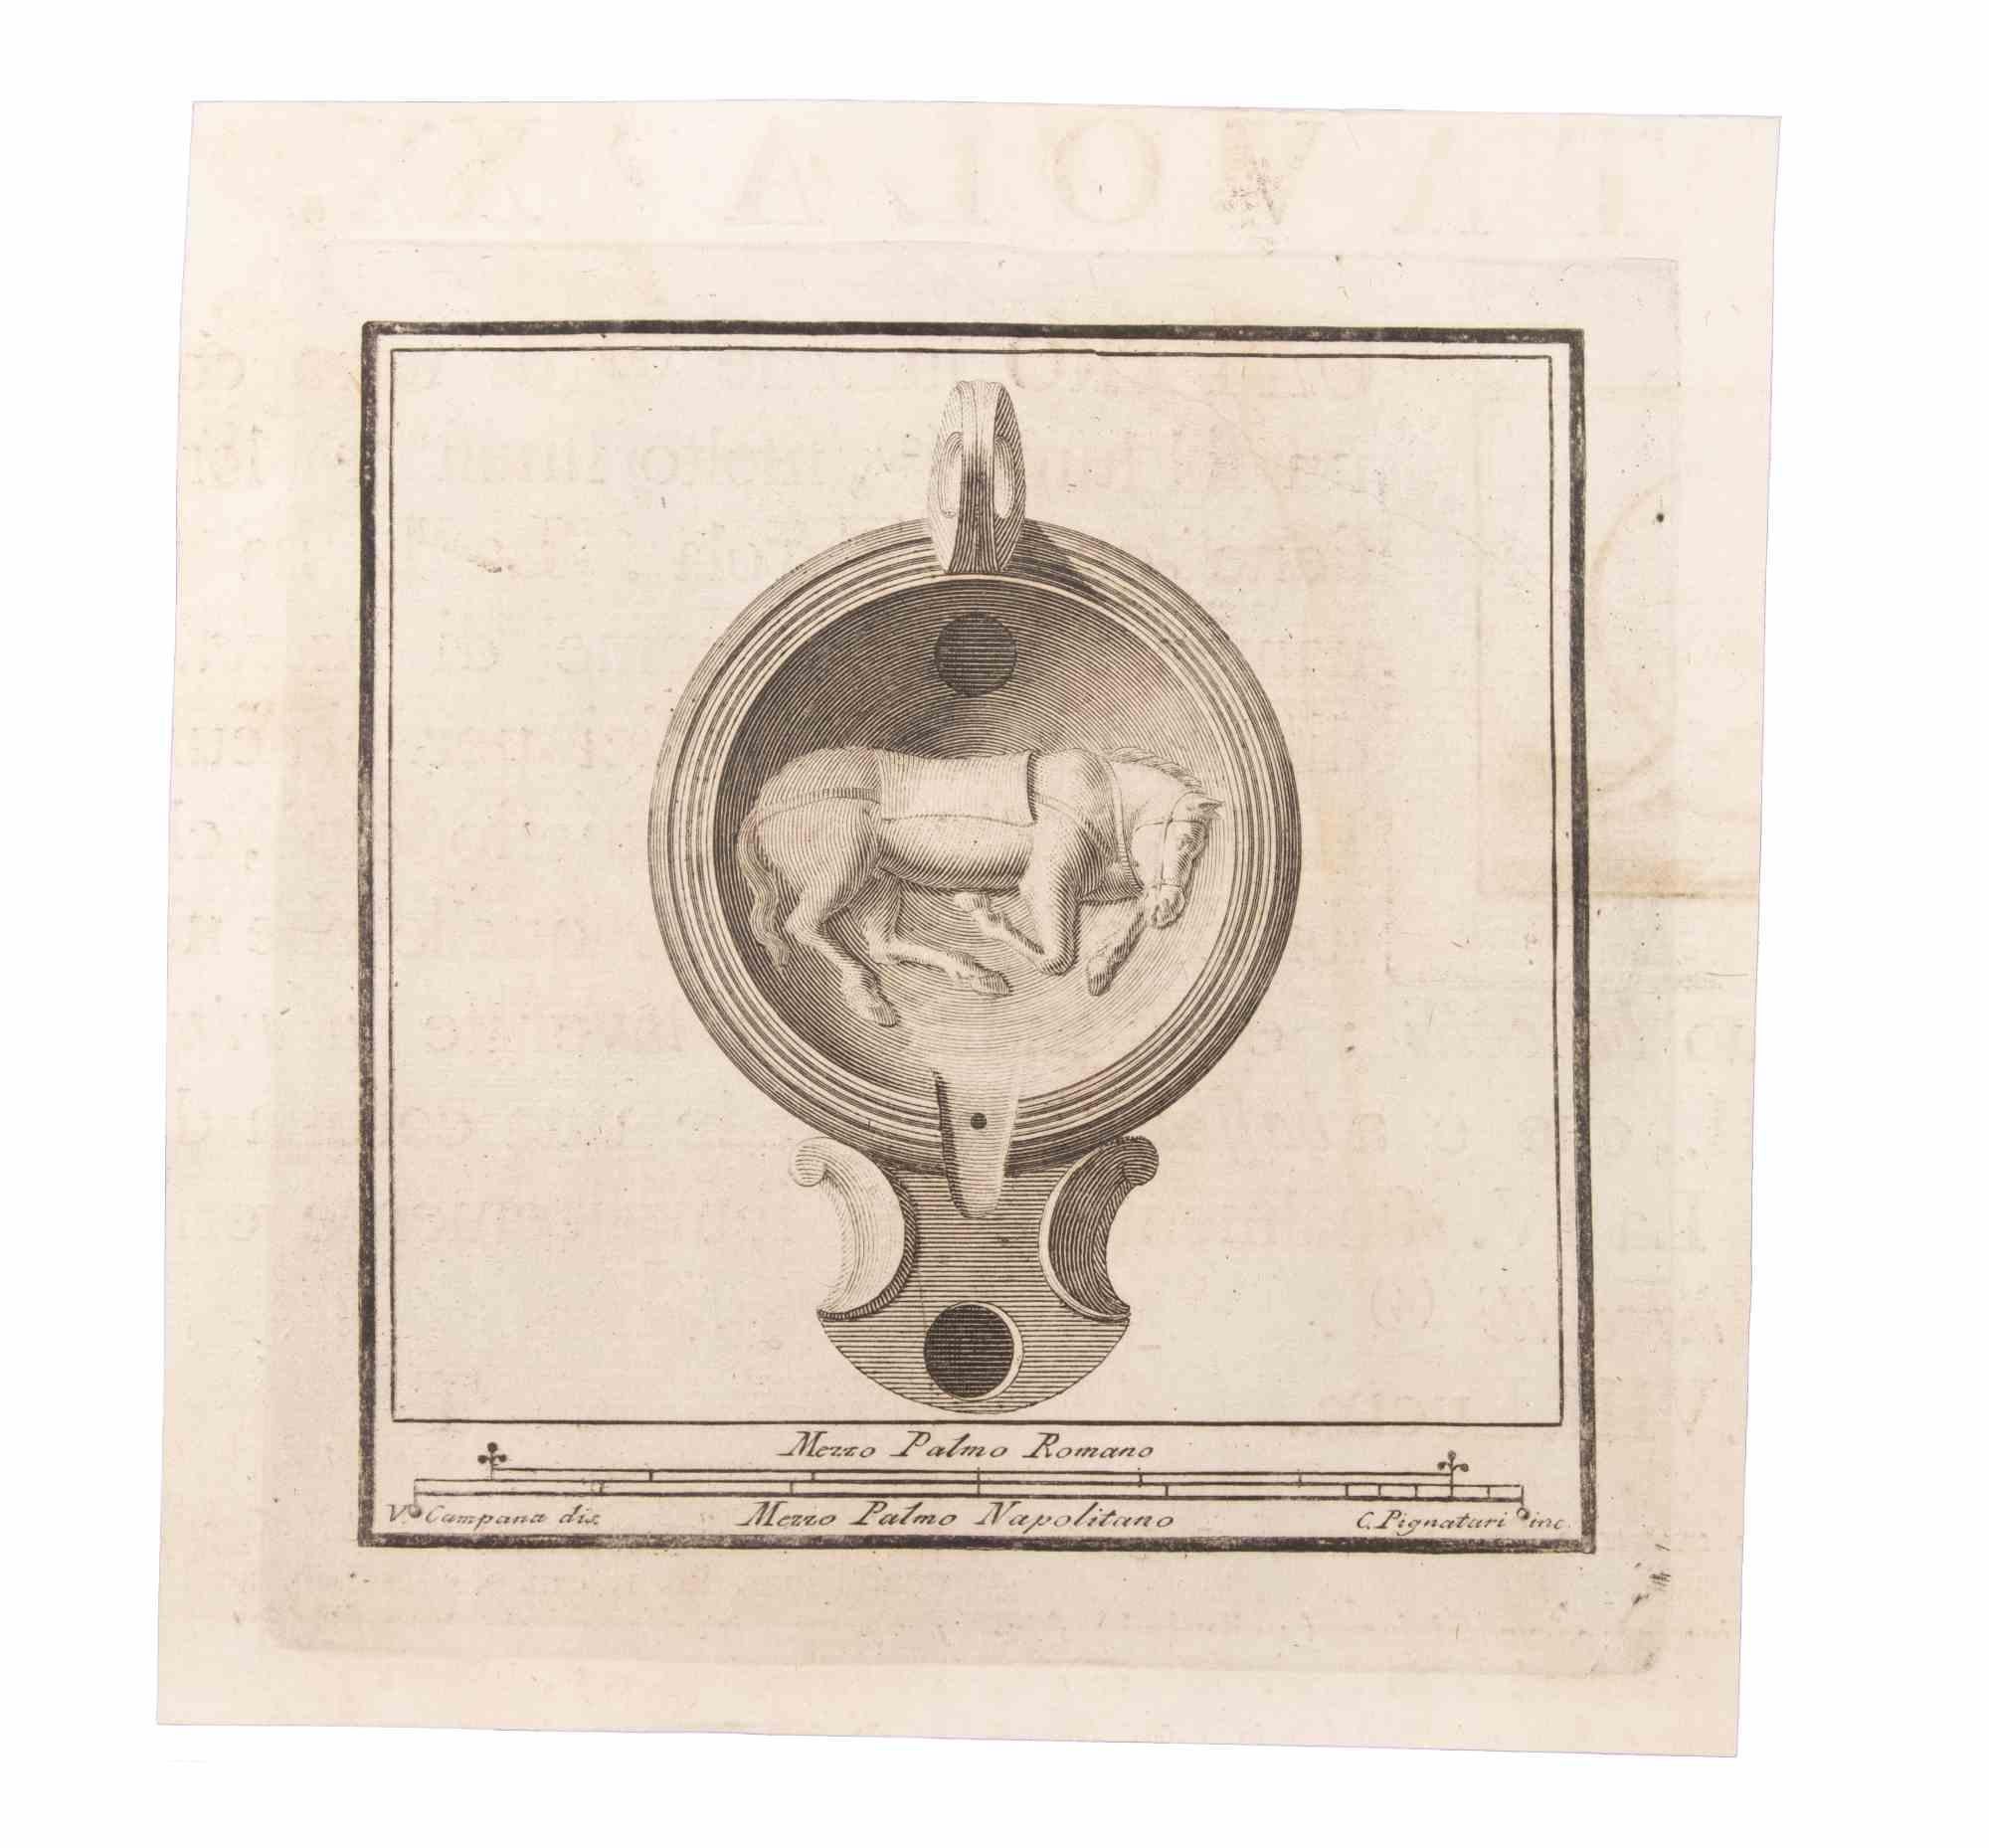 Oil Lamp With Horse is an Etching realized by Carlo Pignatari (18th century).

The etching belongs to the print suite “Antiquities of Herculaneum Exposed” (original title: “Le Antichità di Ercolano Esposte”), an eight-volume volume of engravings of